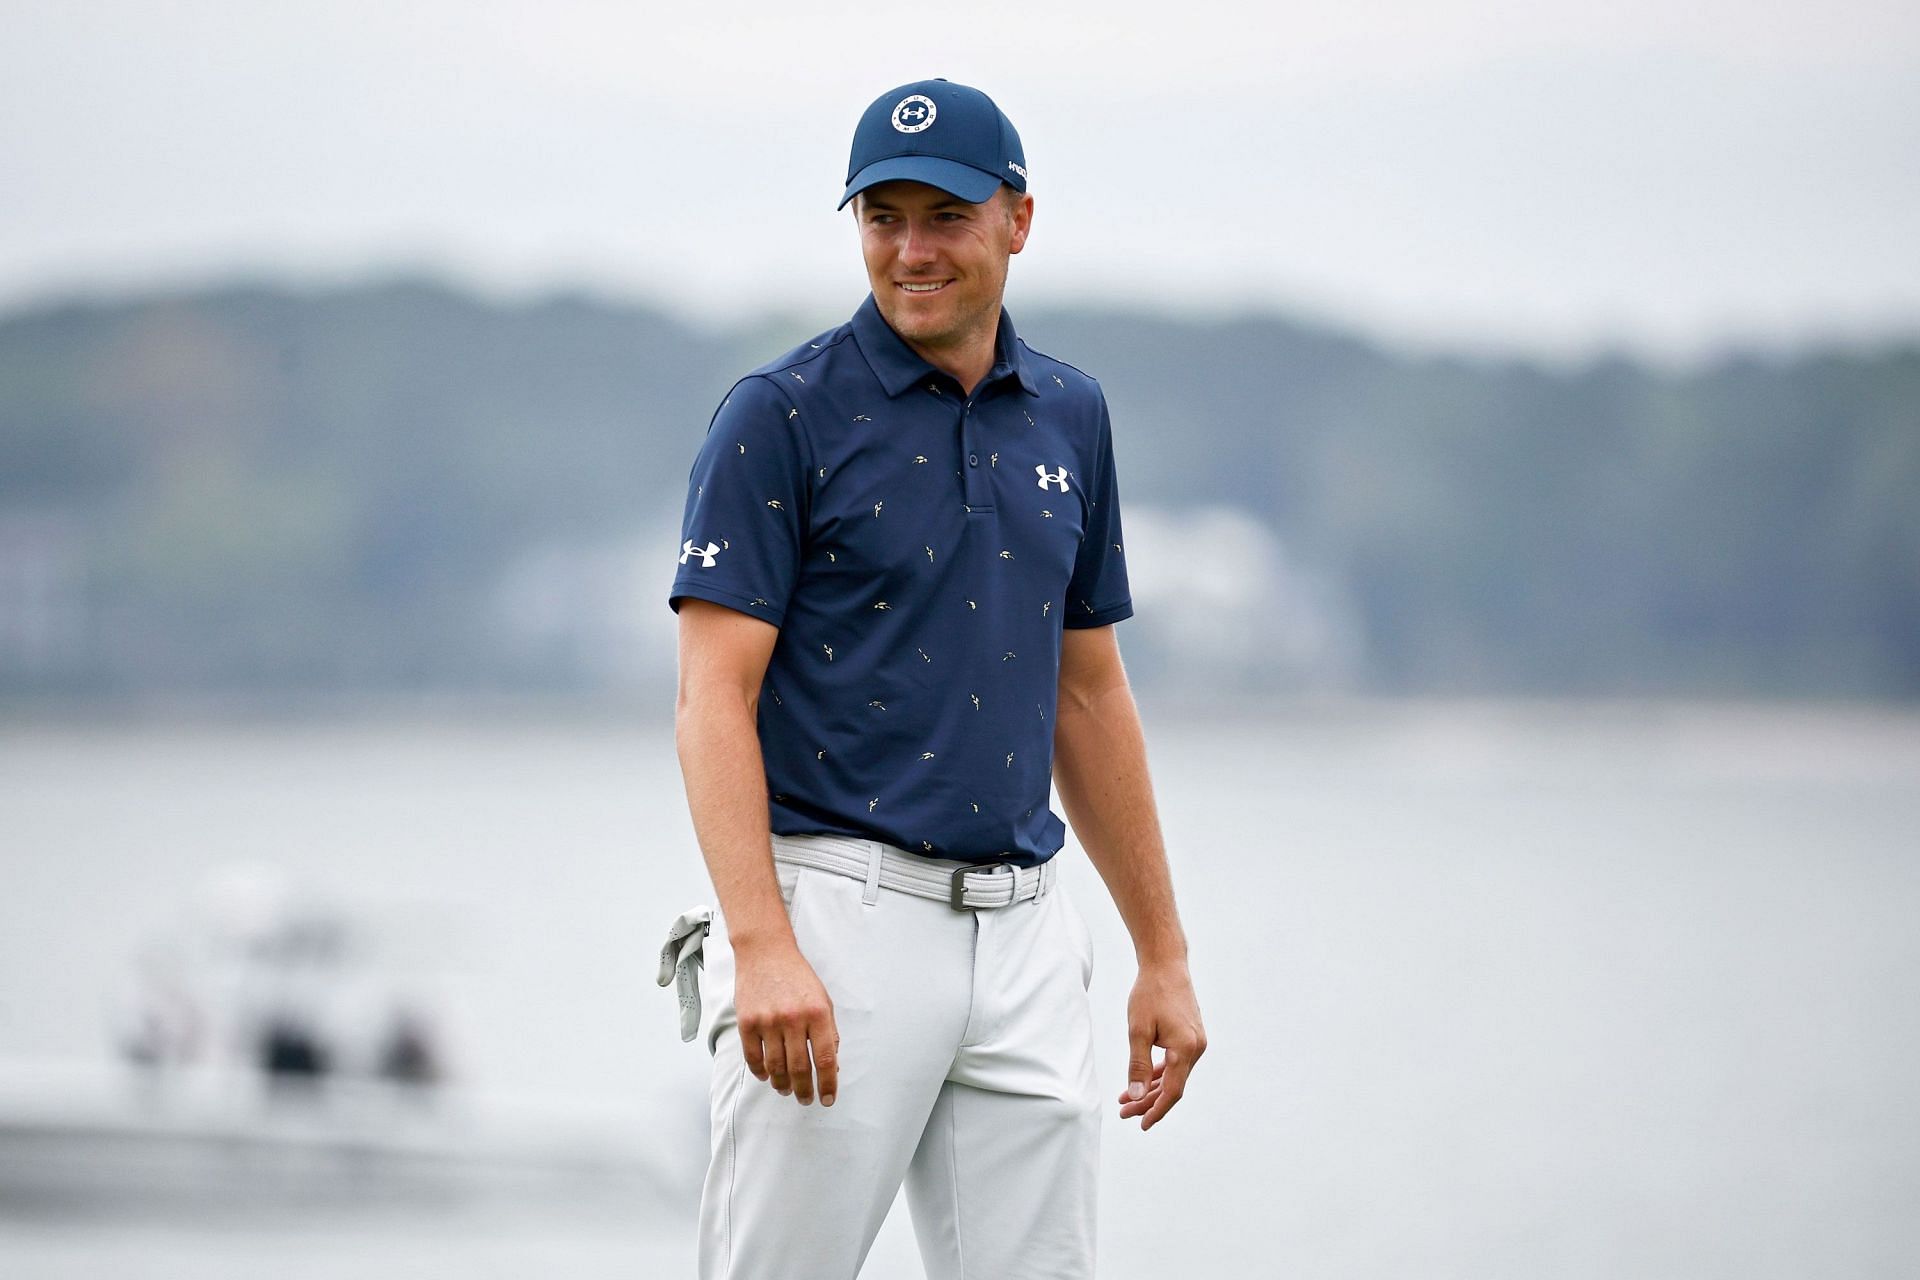 Jordan Spieth has welcomed the recent changes by the PGA Tour